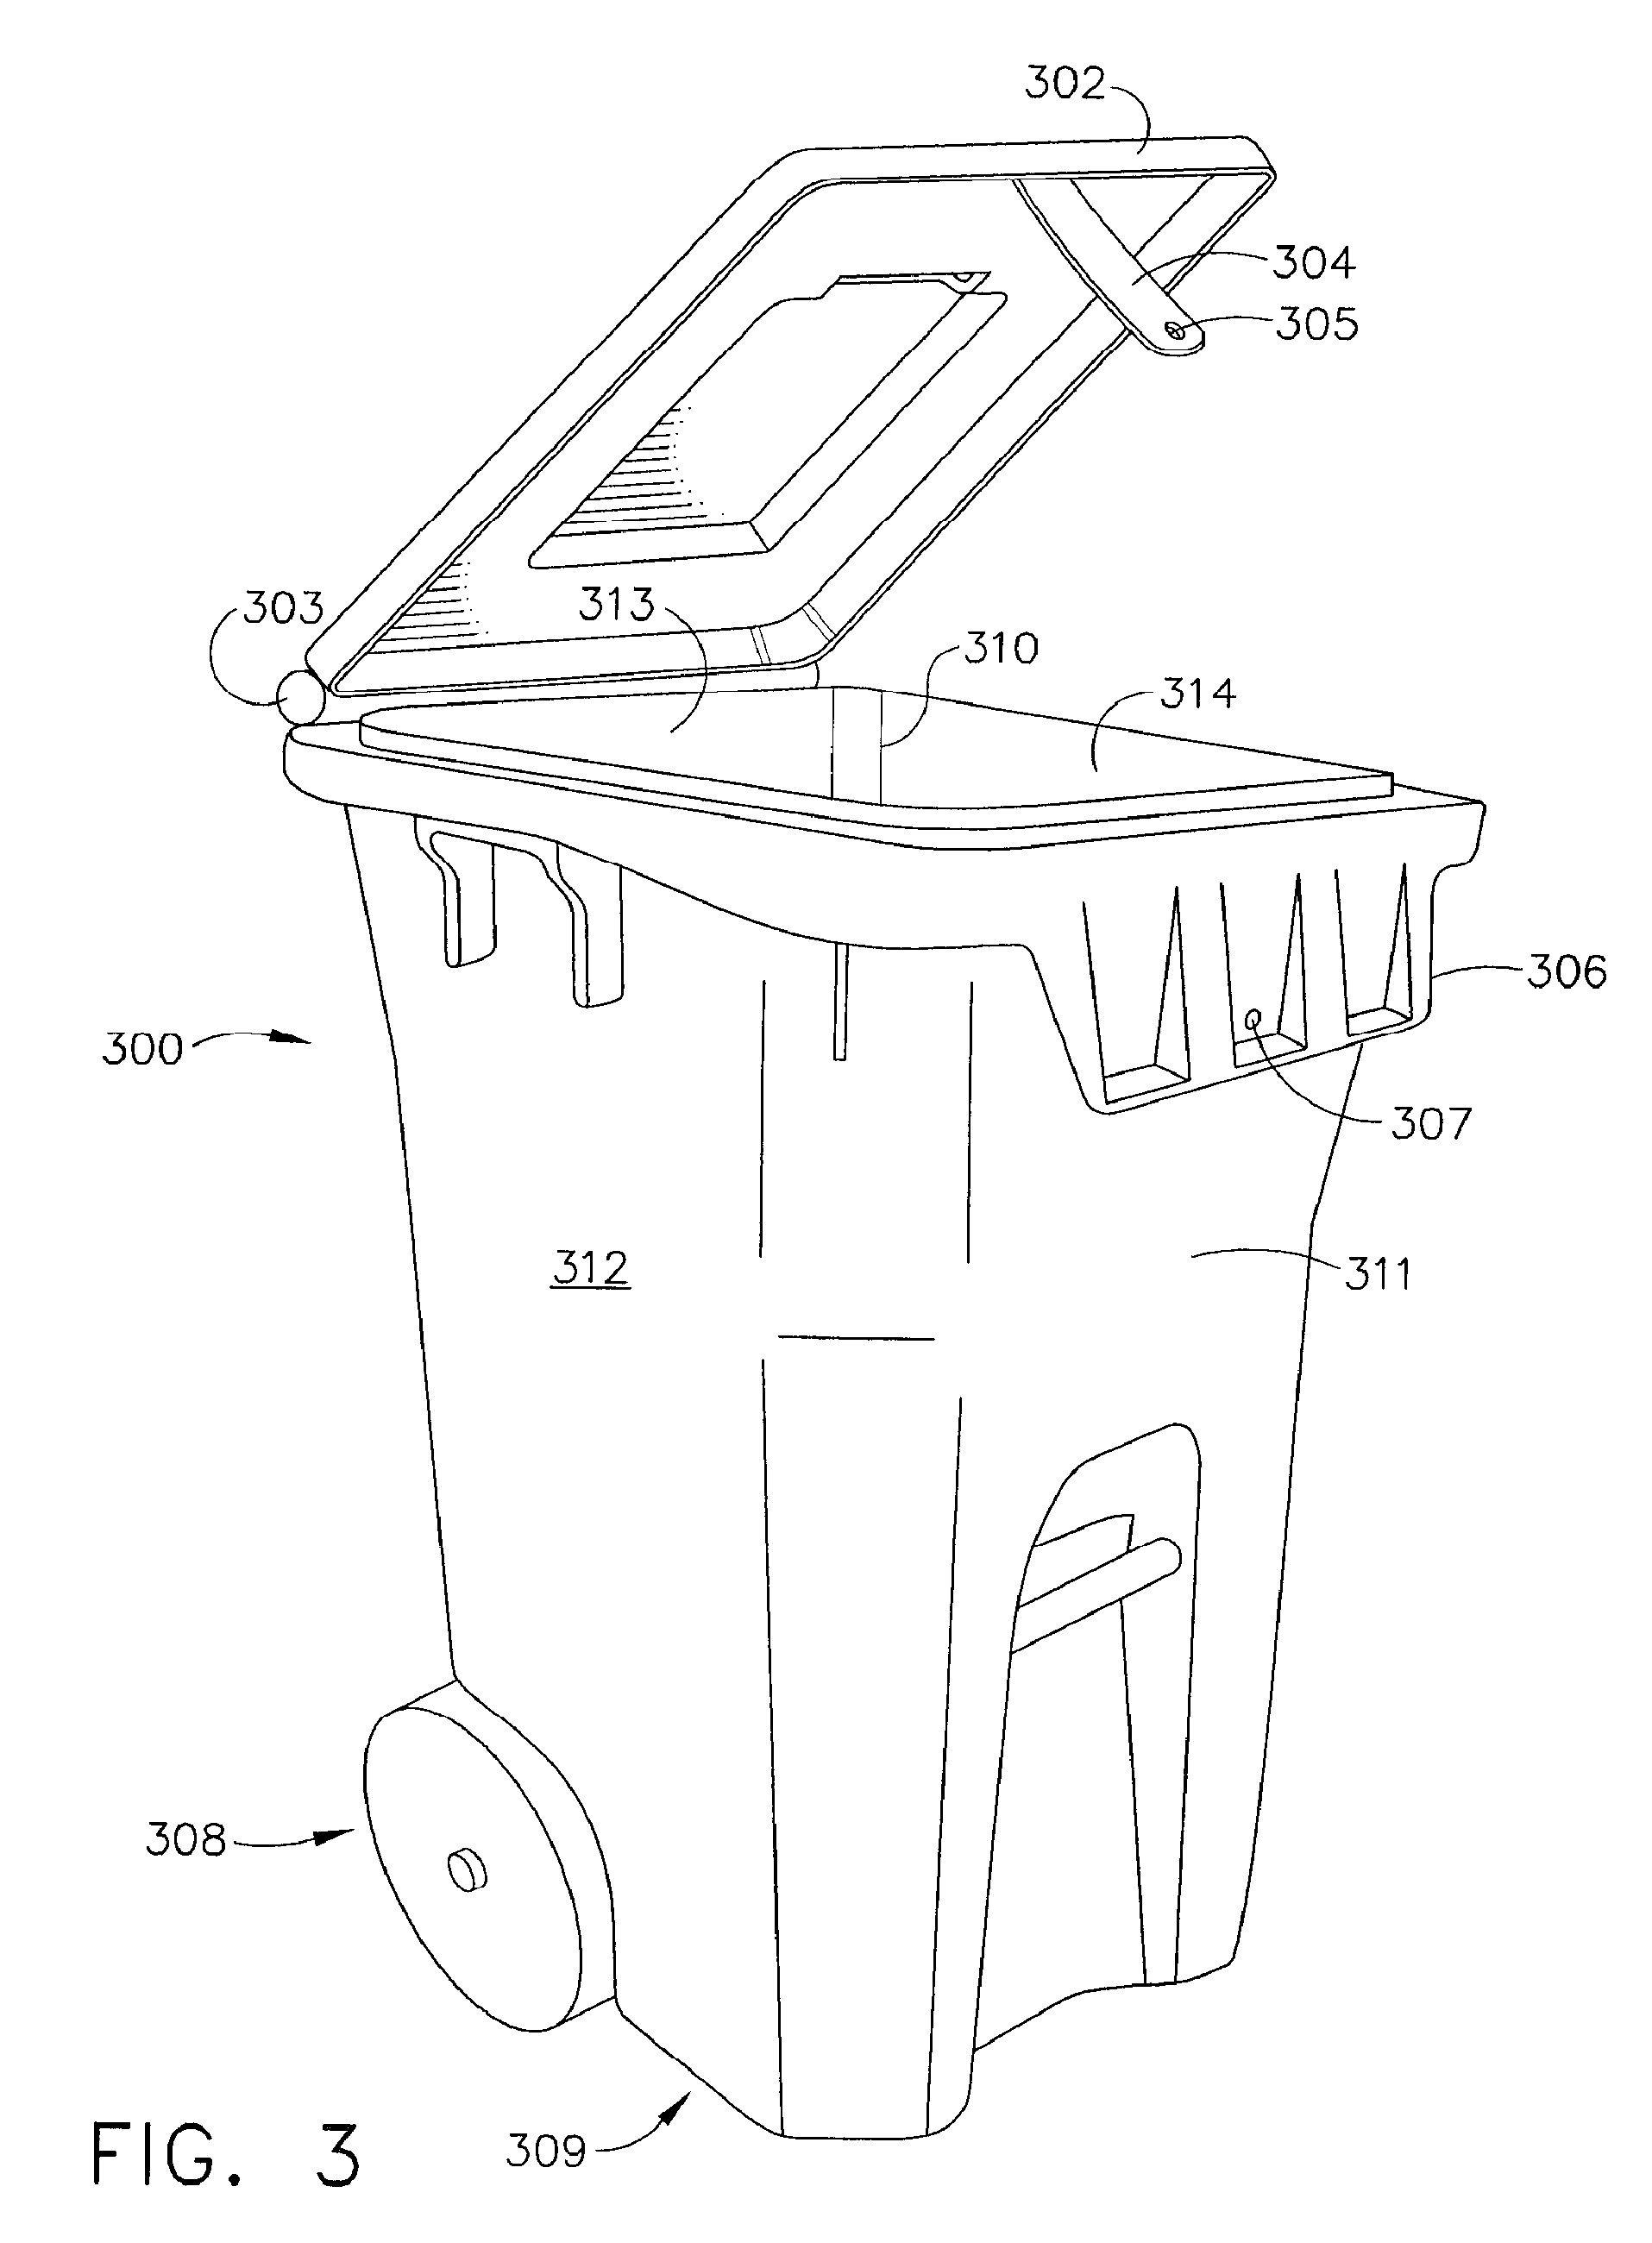 Method of collecting, transporting and cleaning soiled textiles